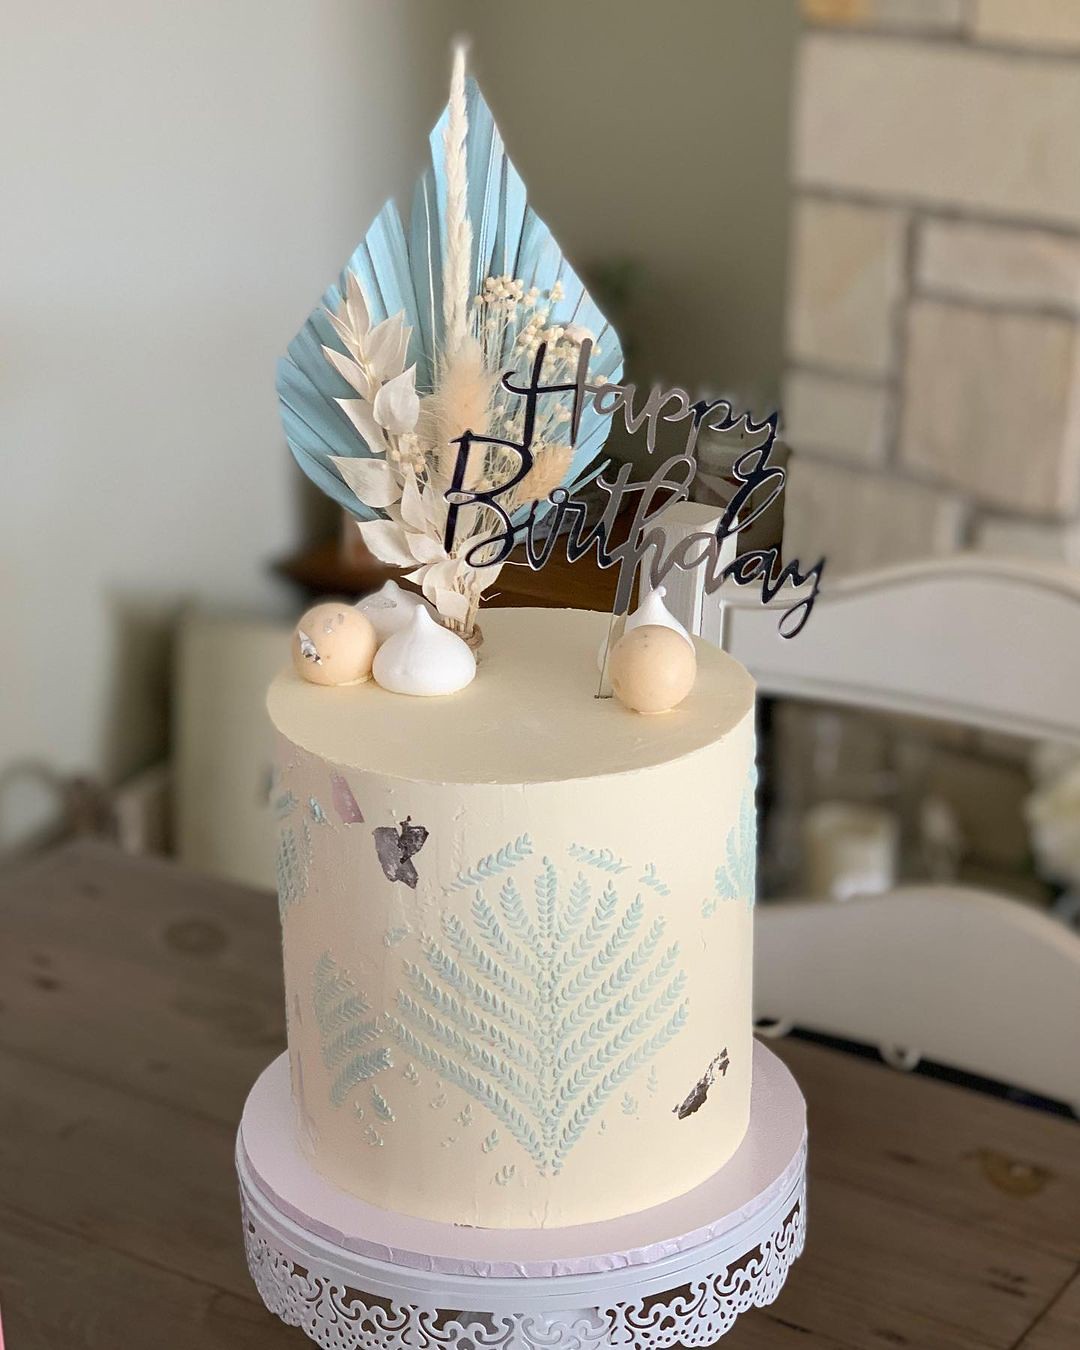 Cake by Amy’s Cakelicious Creations